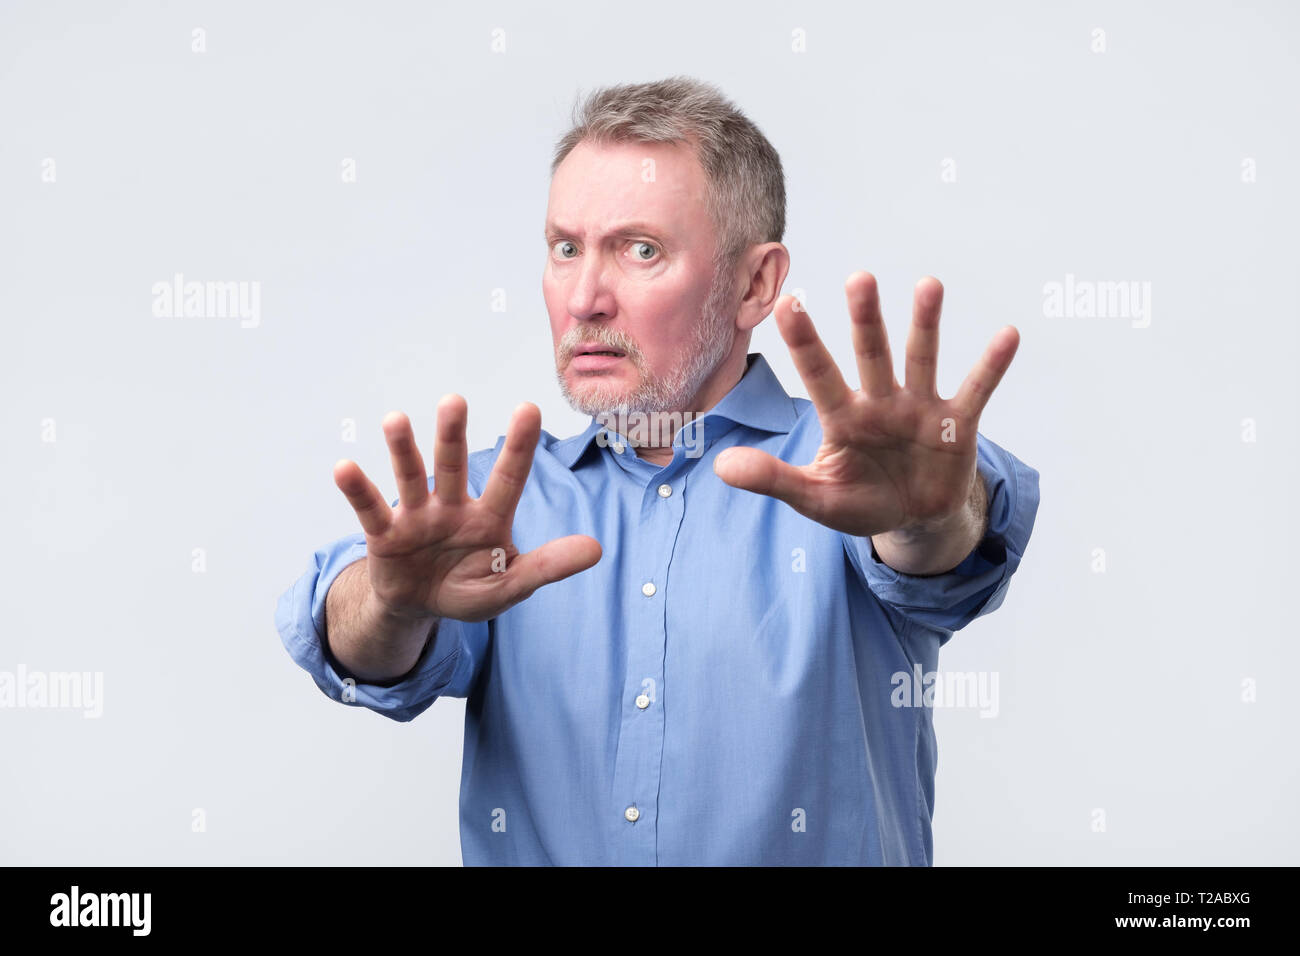 Mature european man in blue shirt and glasses showing refusal gesture. It is not for me, leave me in piece, has angry expression. Studio shoot Stock Photo